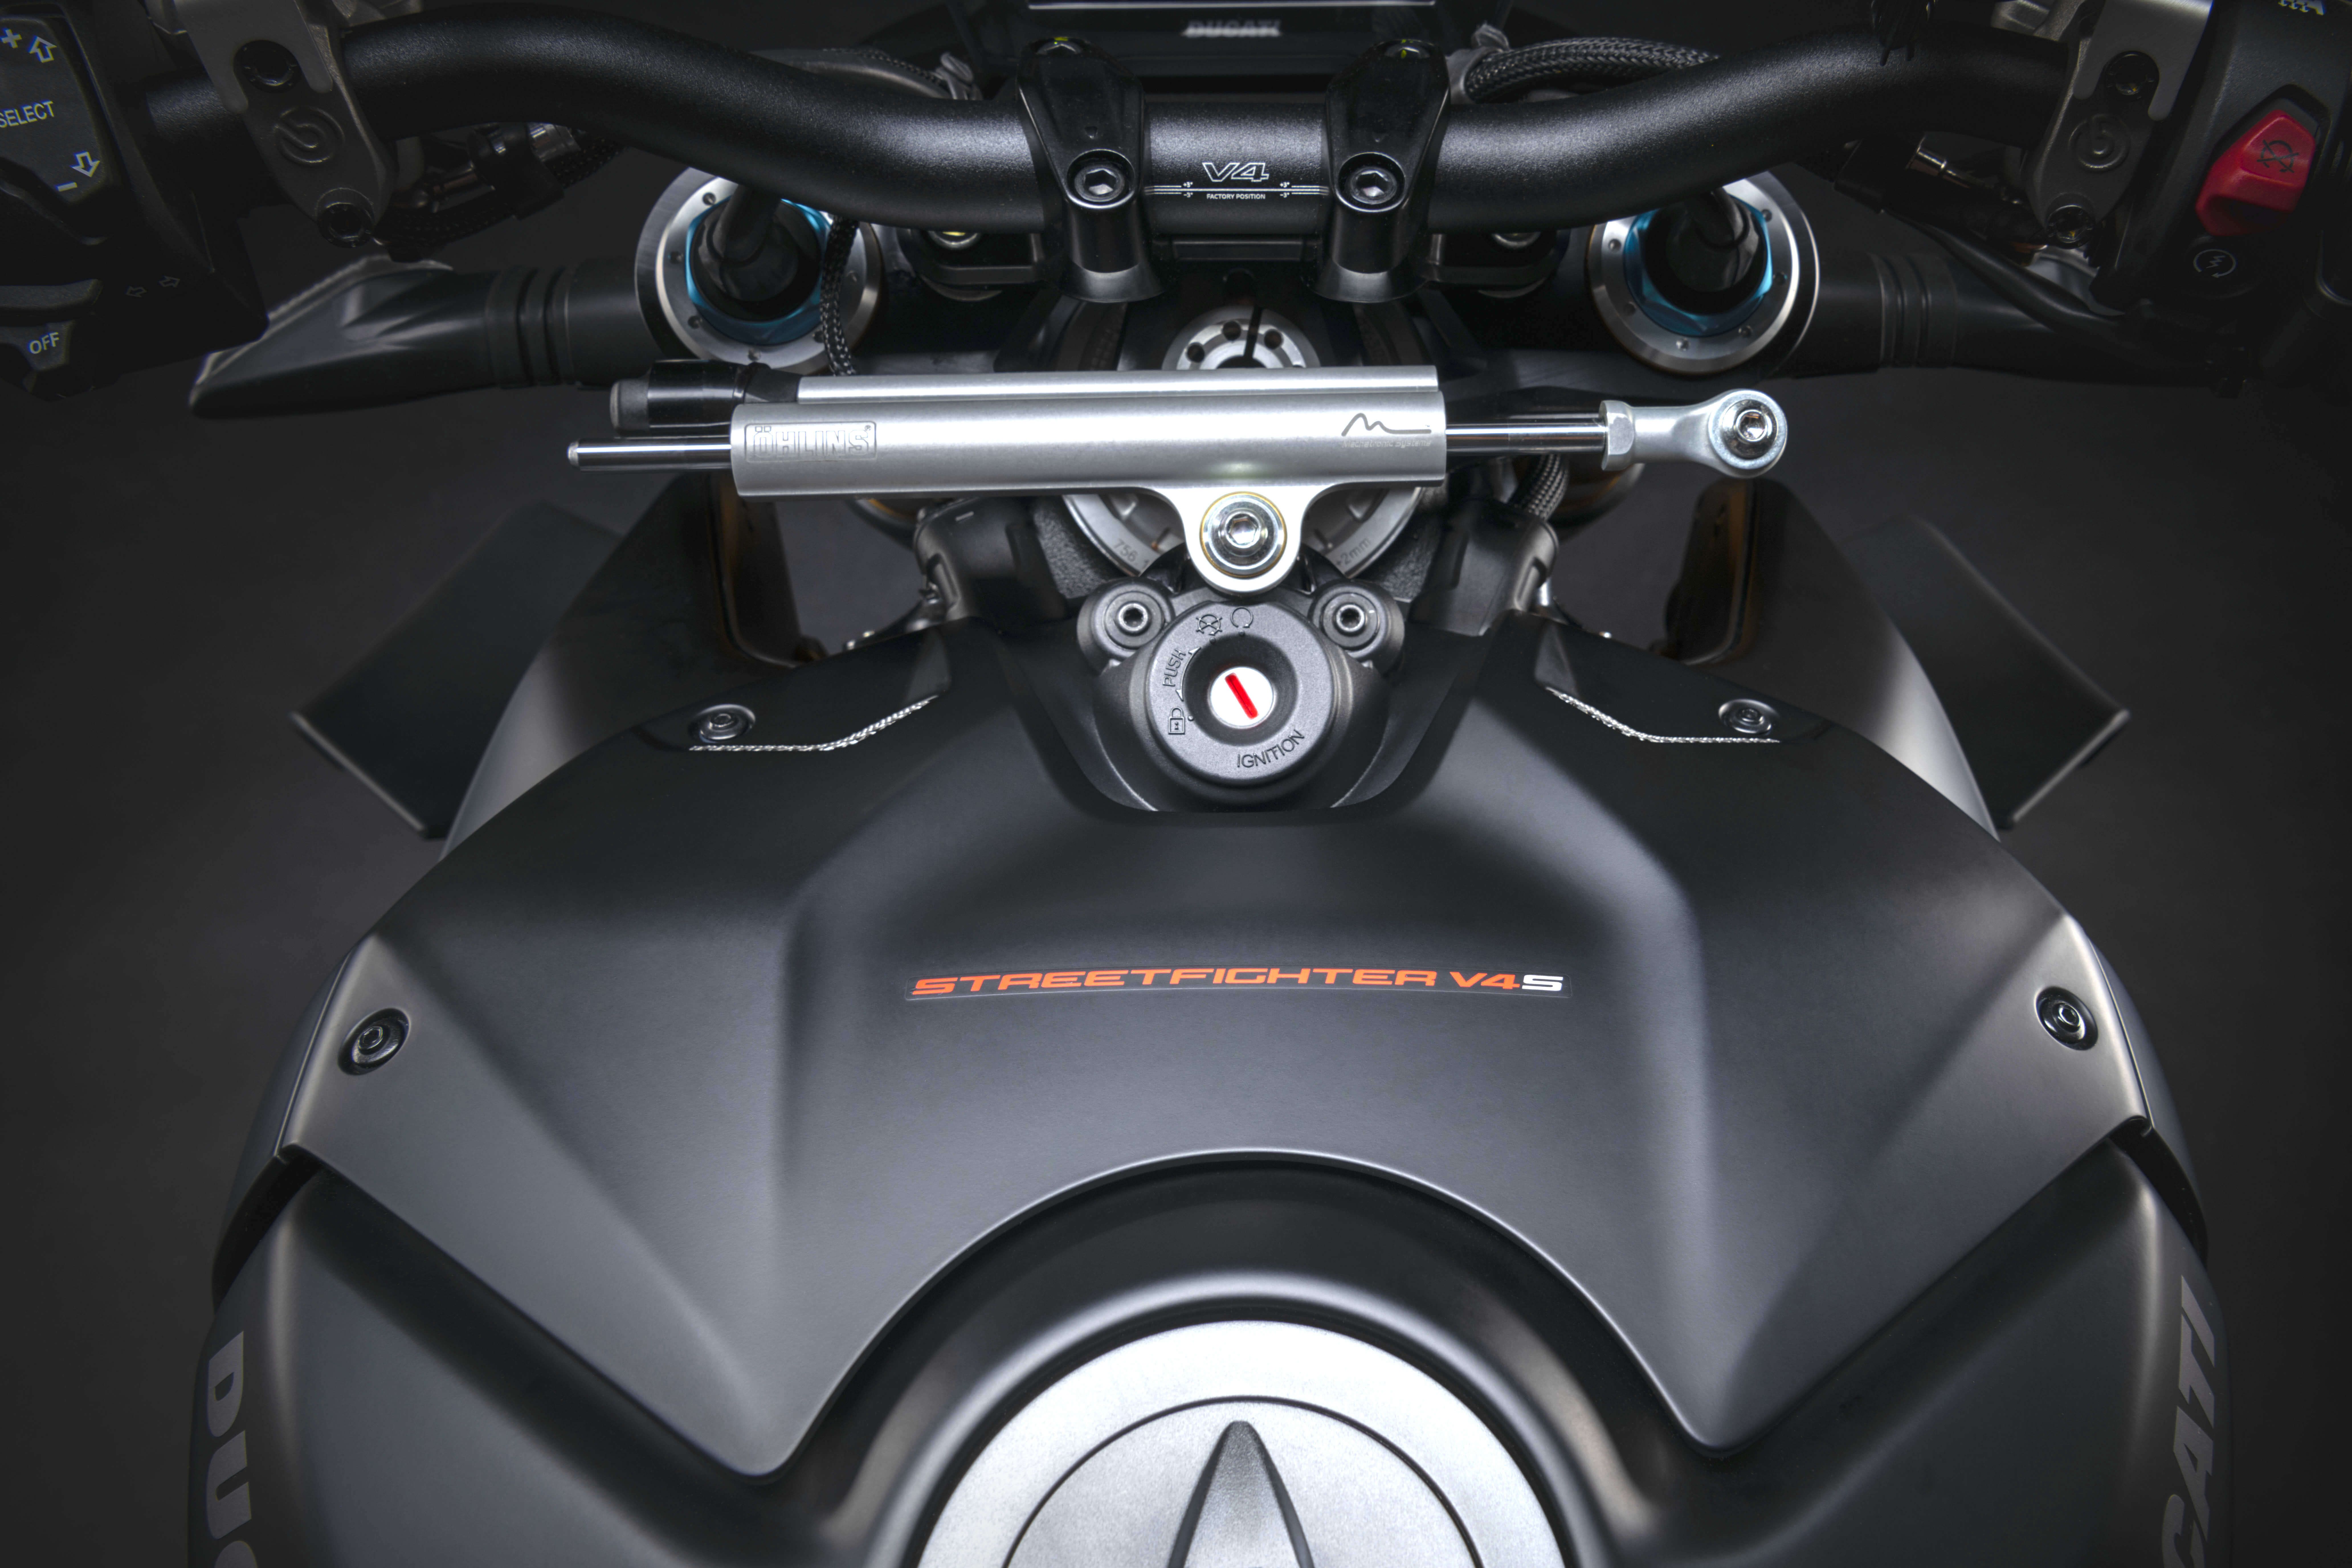 2021 Ducati Streetfighter V4S has the same but upgraded technology from the Panigale V4